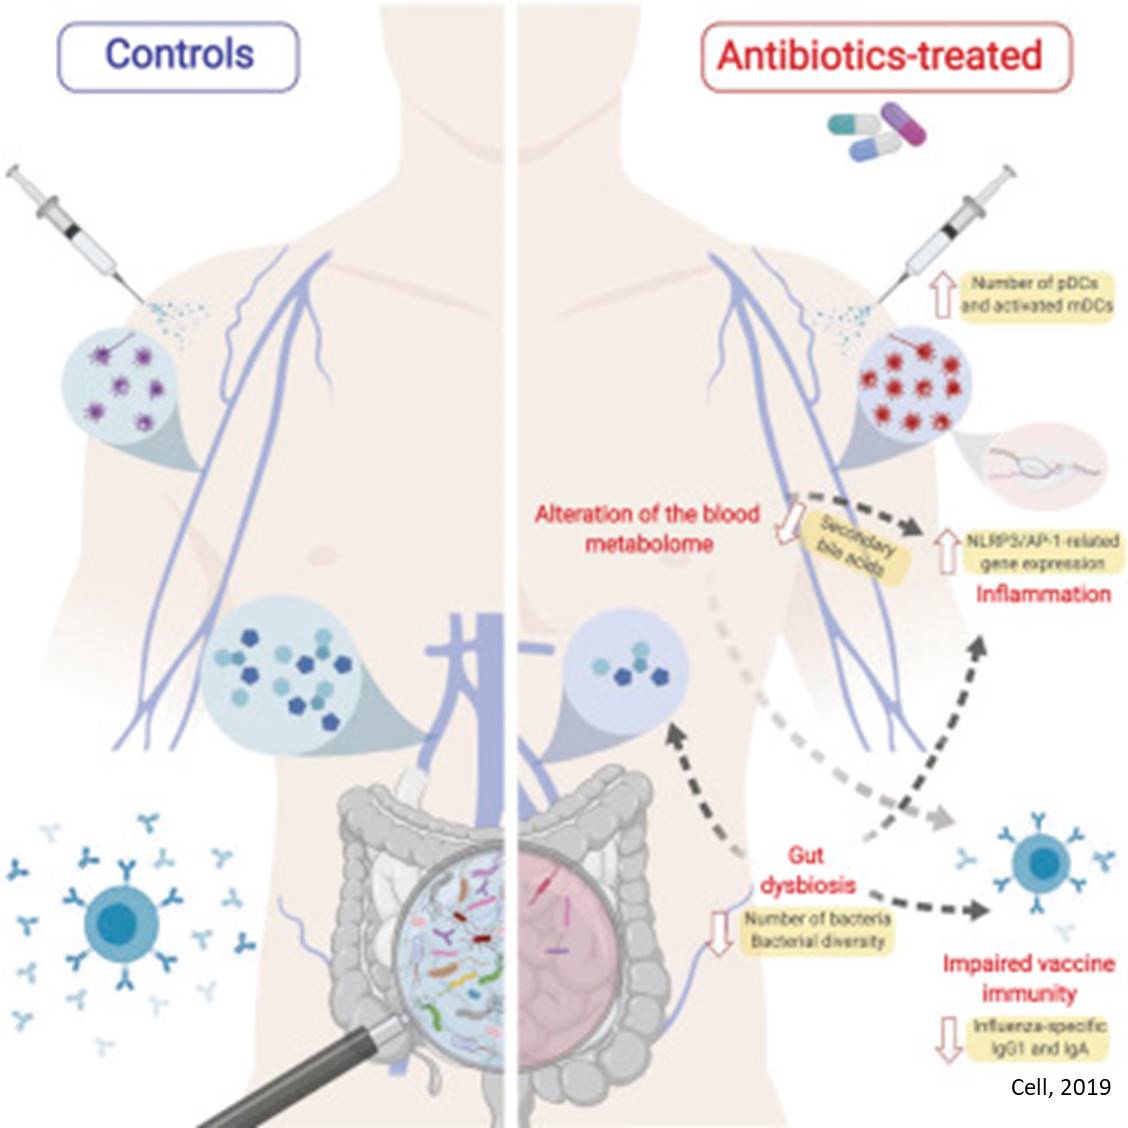 Antibiotics disruption of microbiome may adversely affect viral infections 